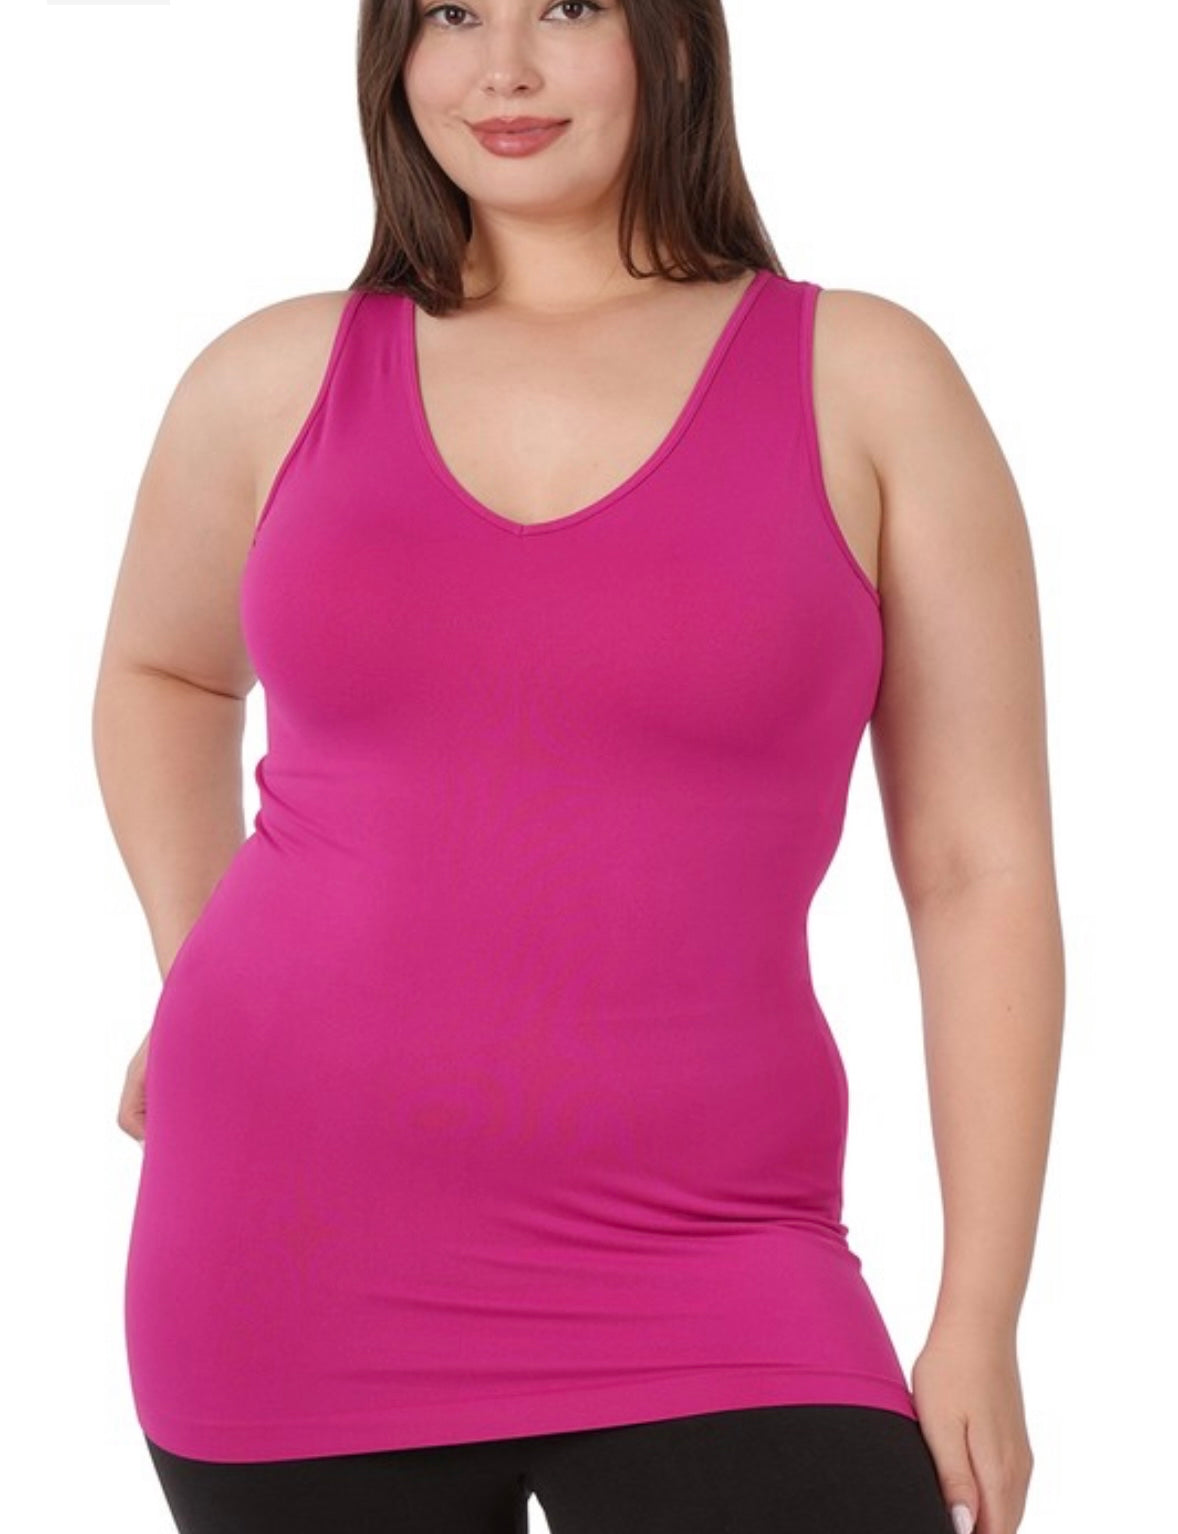 Underneath it All Seamless Tank - 5 colors!